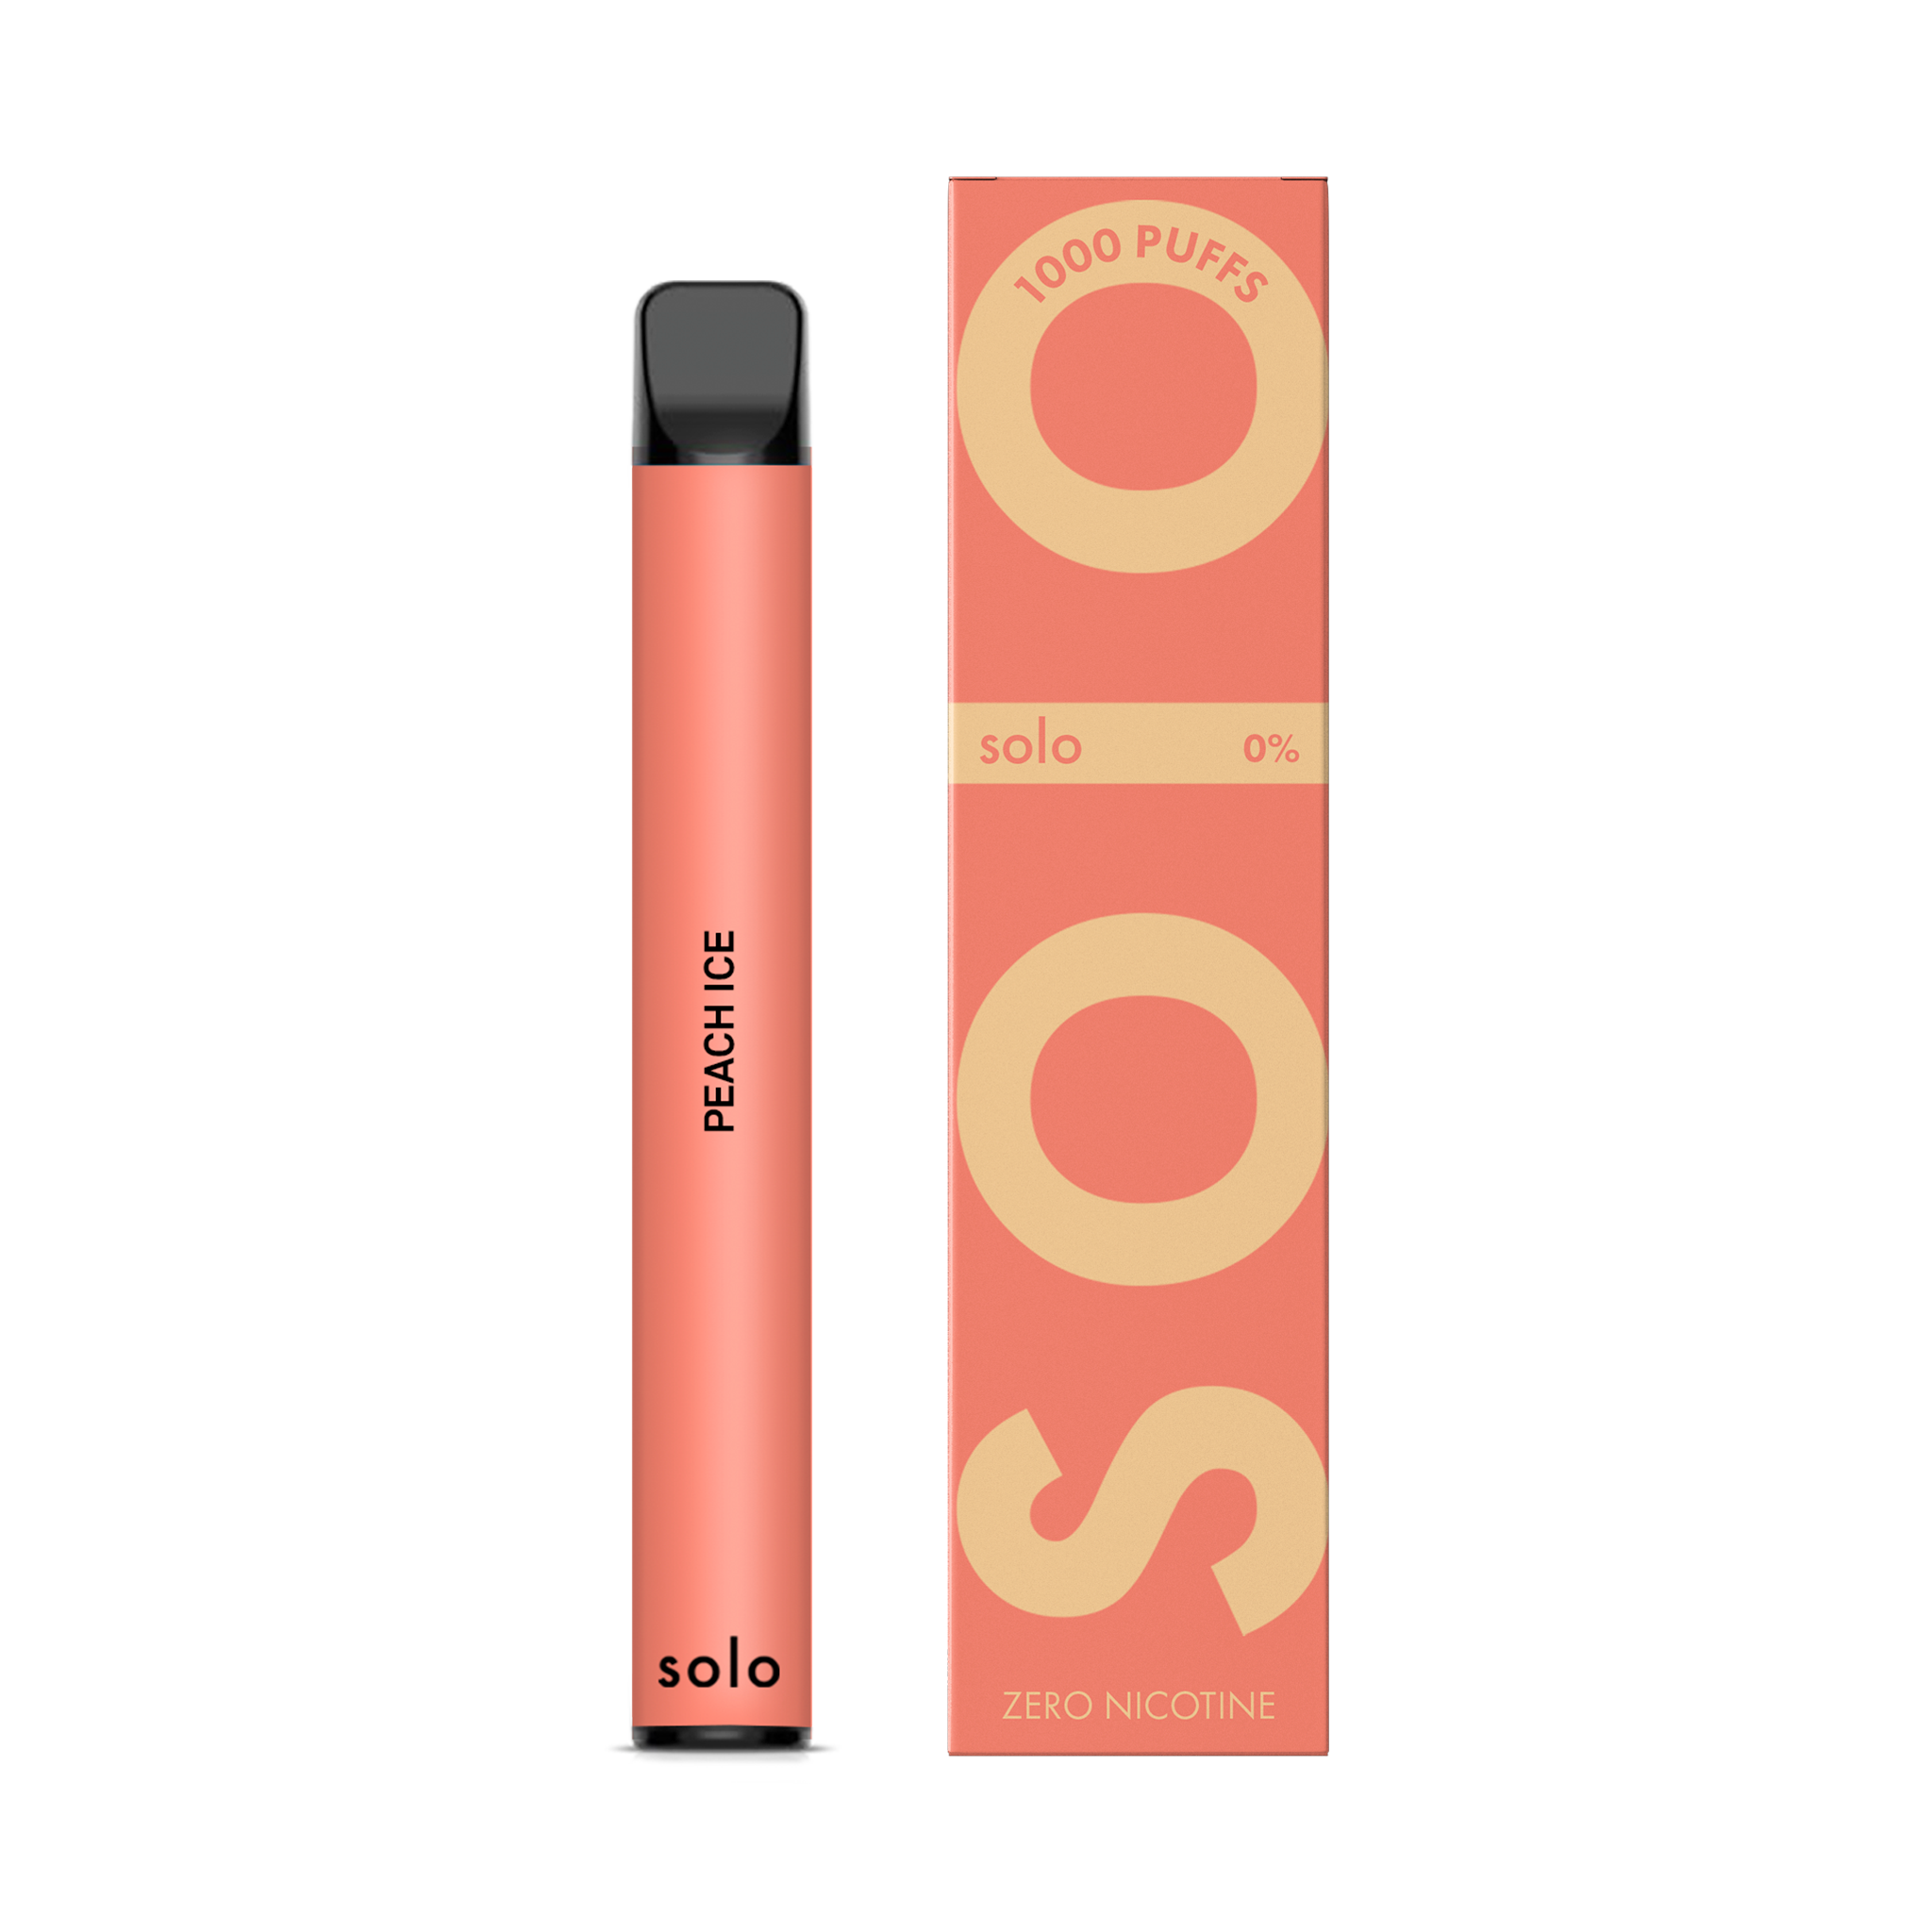 Peach Ice Disposable Vape by solo